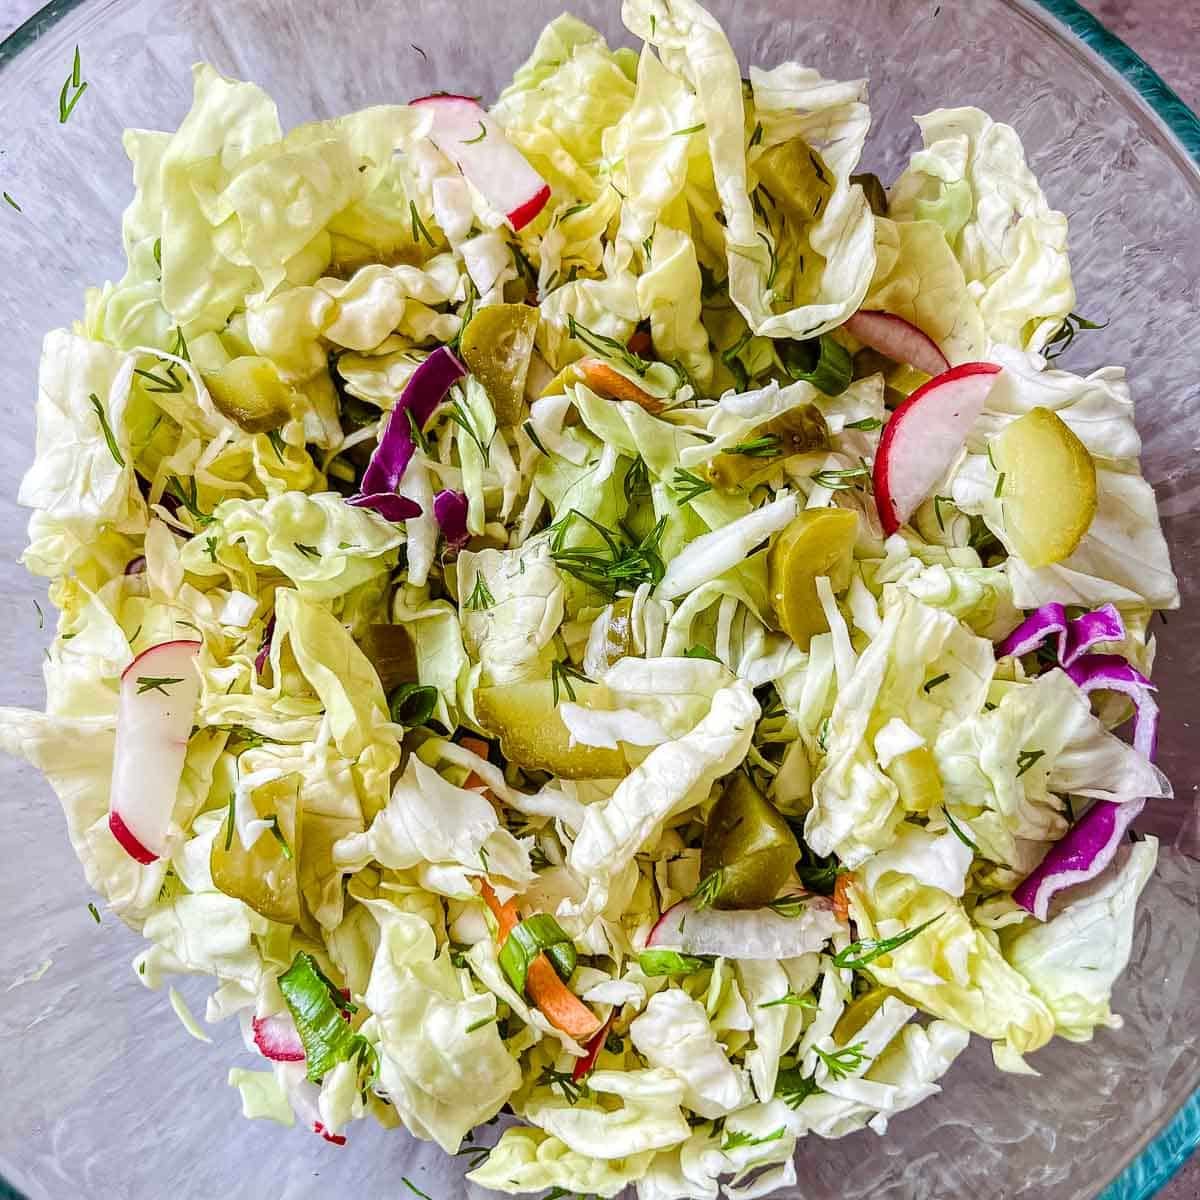 chopped dill pickle salad before dressing is added